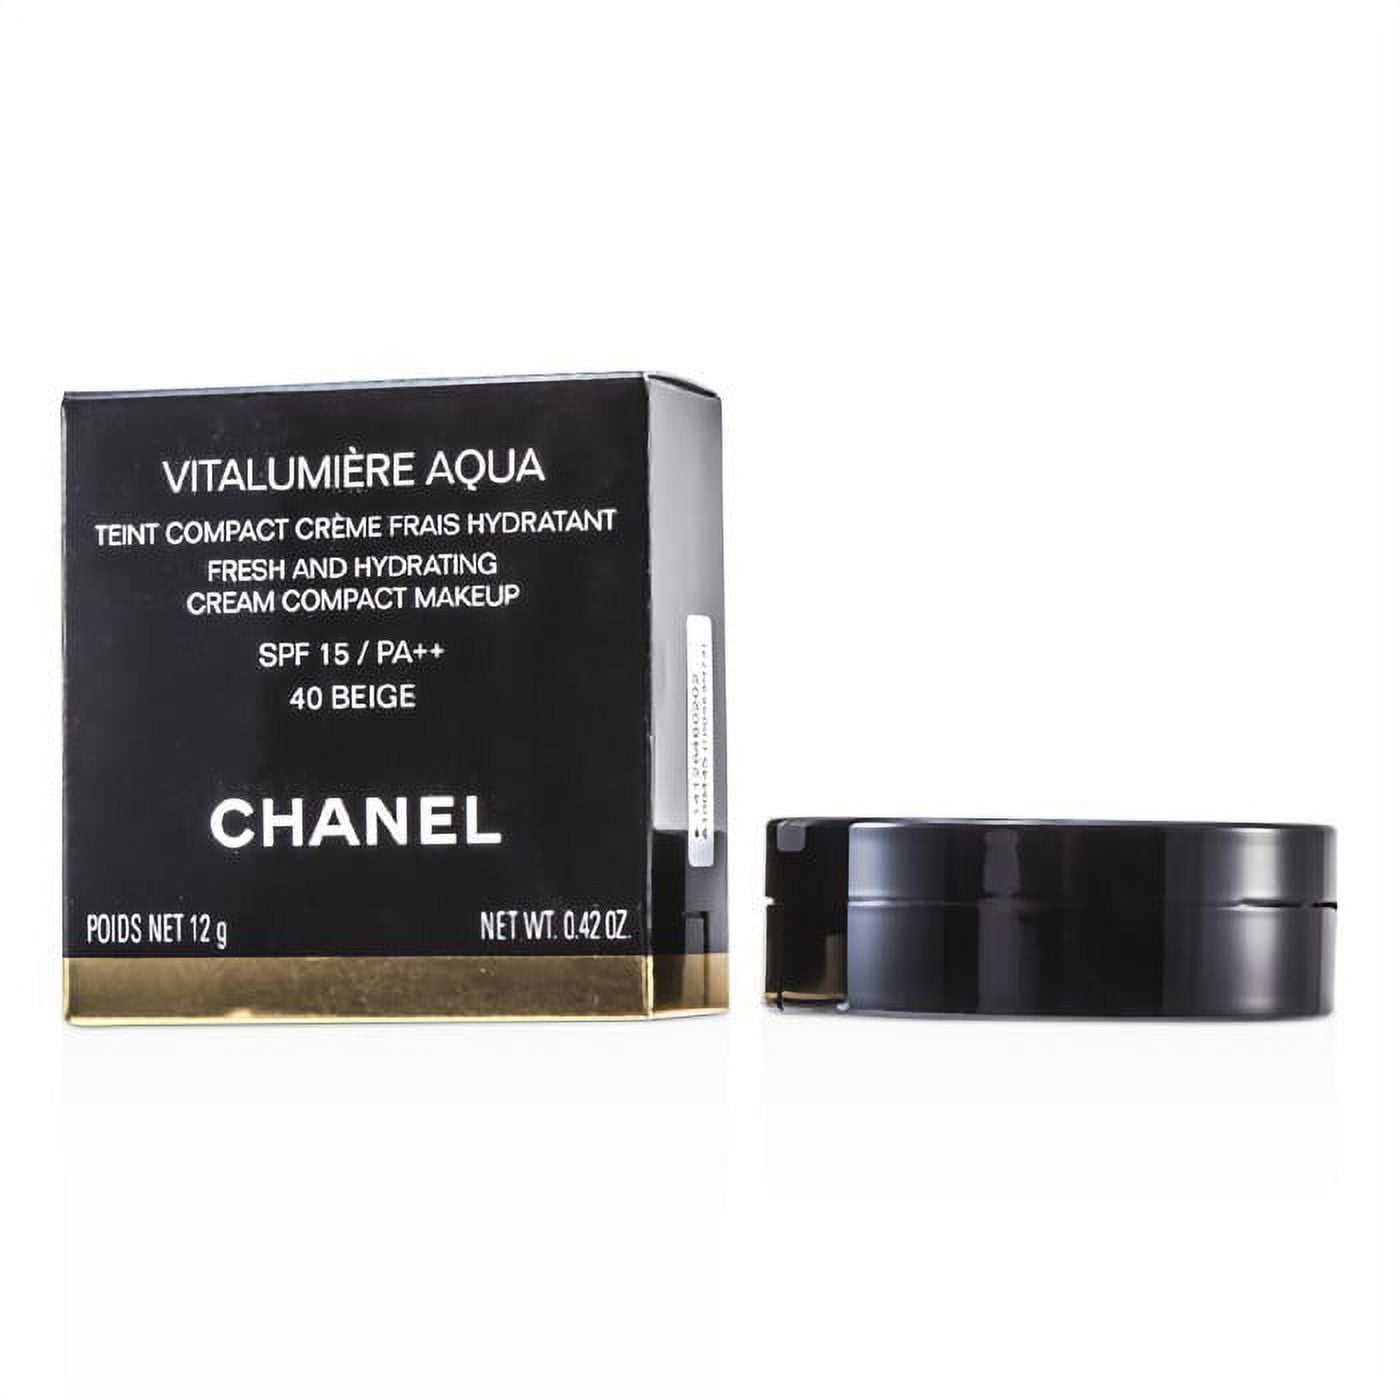 Vitalumiere Aqua Fresh and Hydrating Cream Compact Makeup SPF 15 - # 40  Beige by Chanel for Women - 0.42 oz Makeup